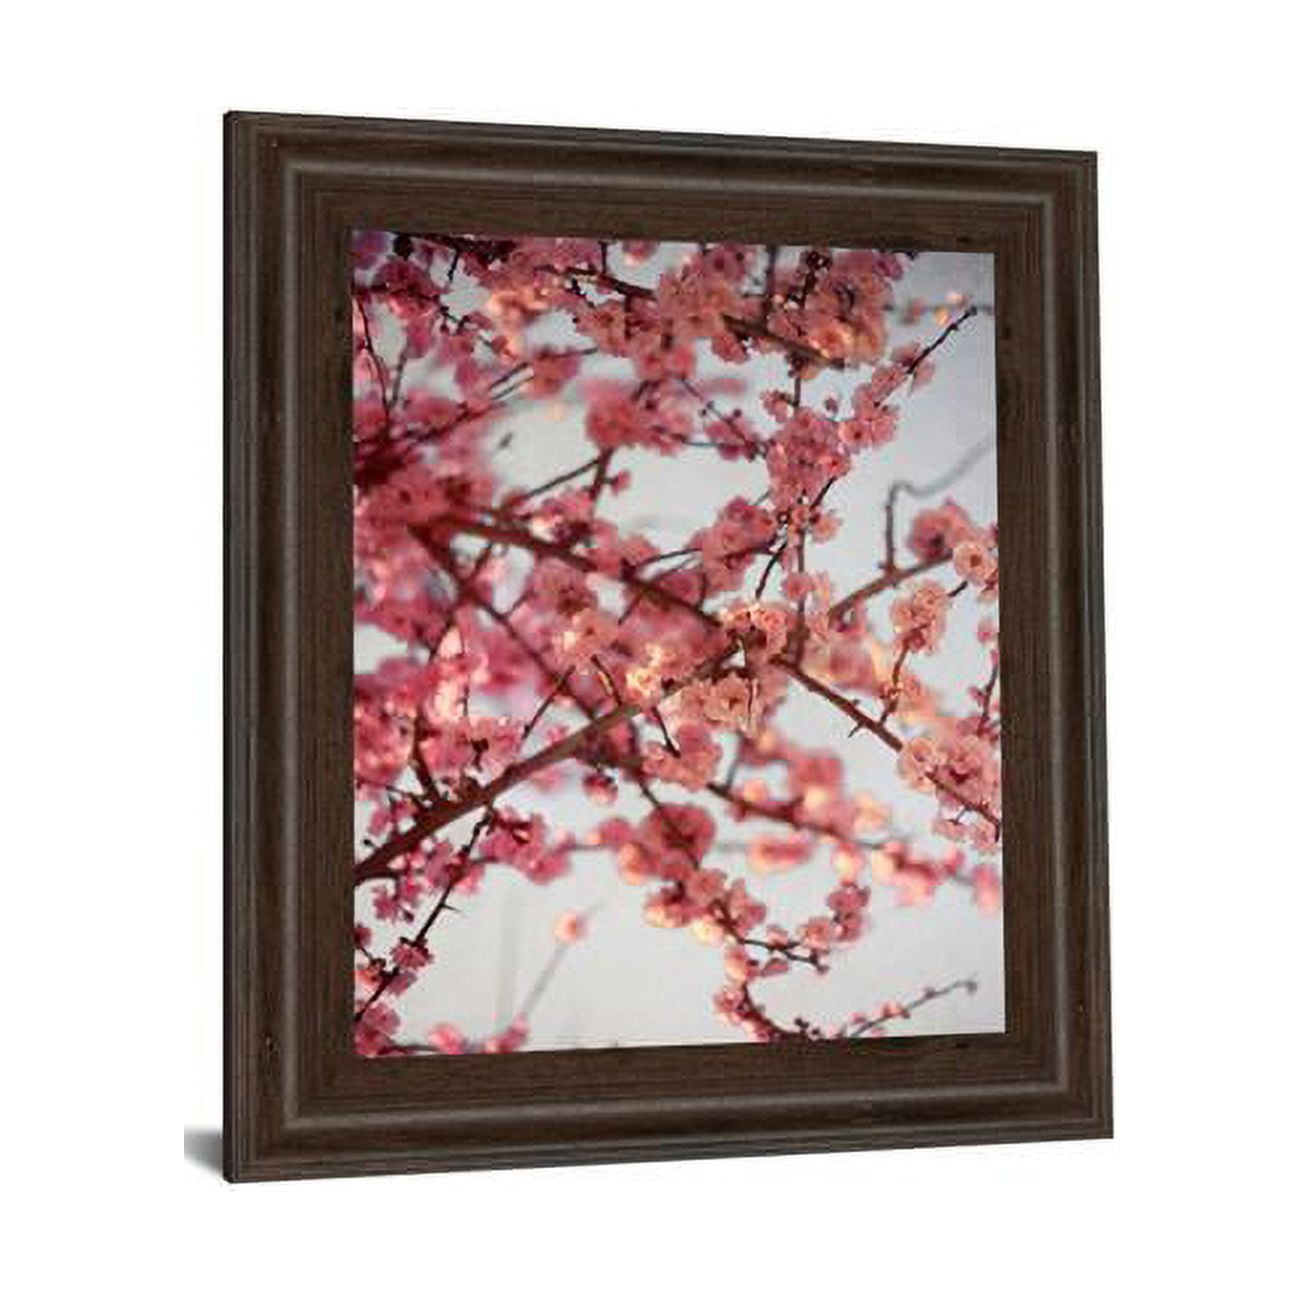 Picture of Classy Art 8055 22 x 26 in. Cherry Blossoms I by Susan Bryant Framed Print Wall Art